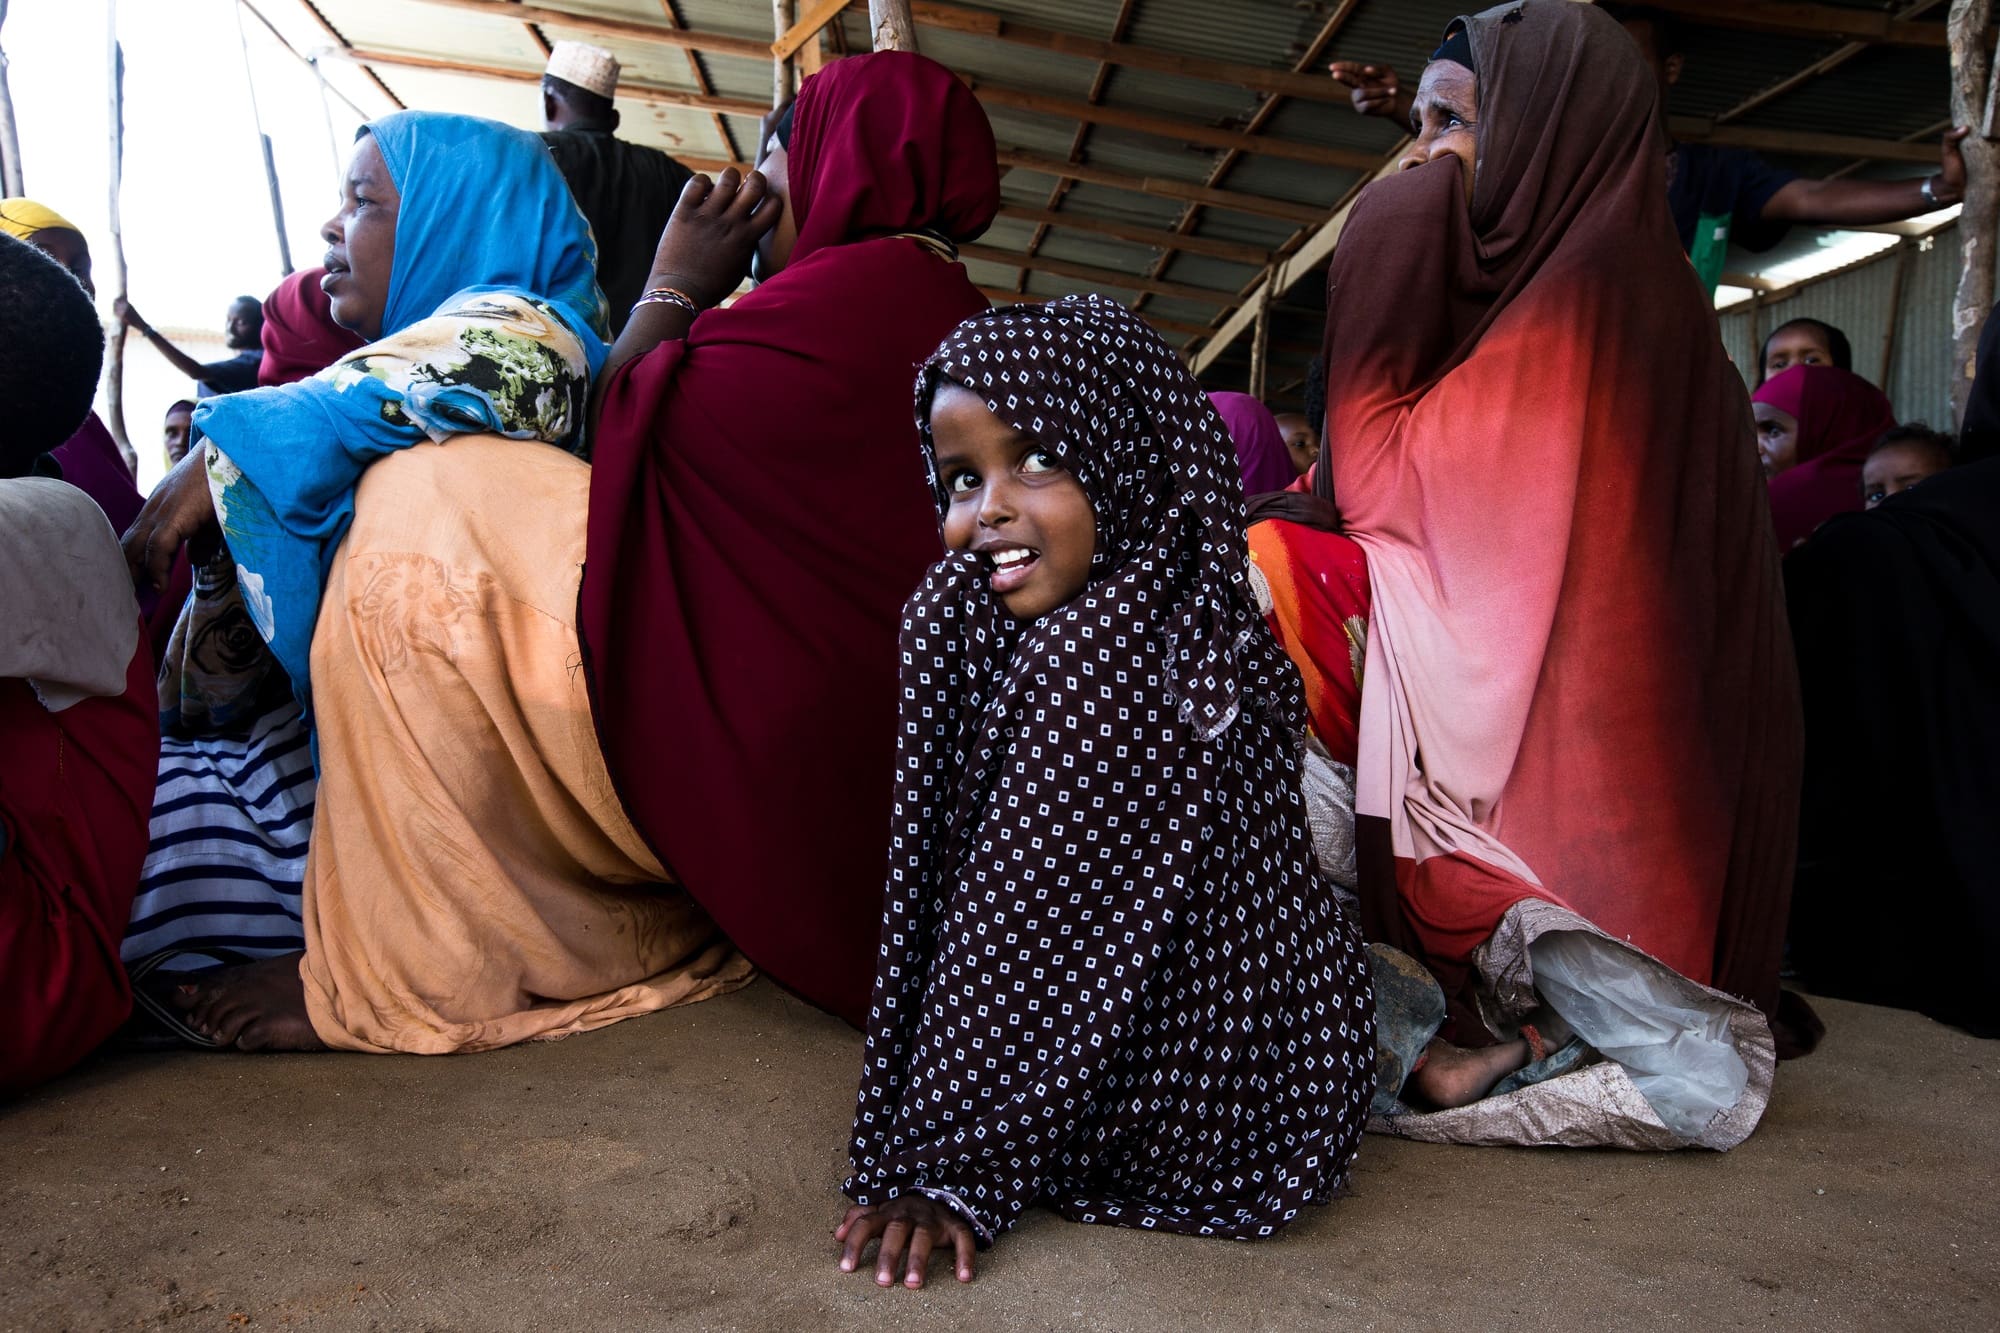 A young girl sits in a line at a food center, wearing a polka dot hijab over her head